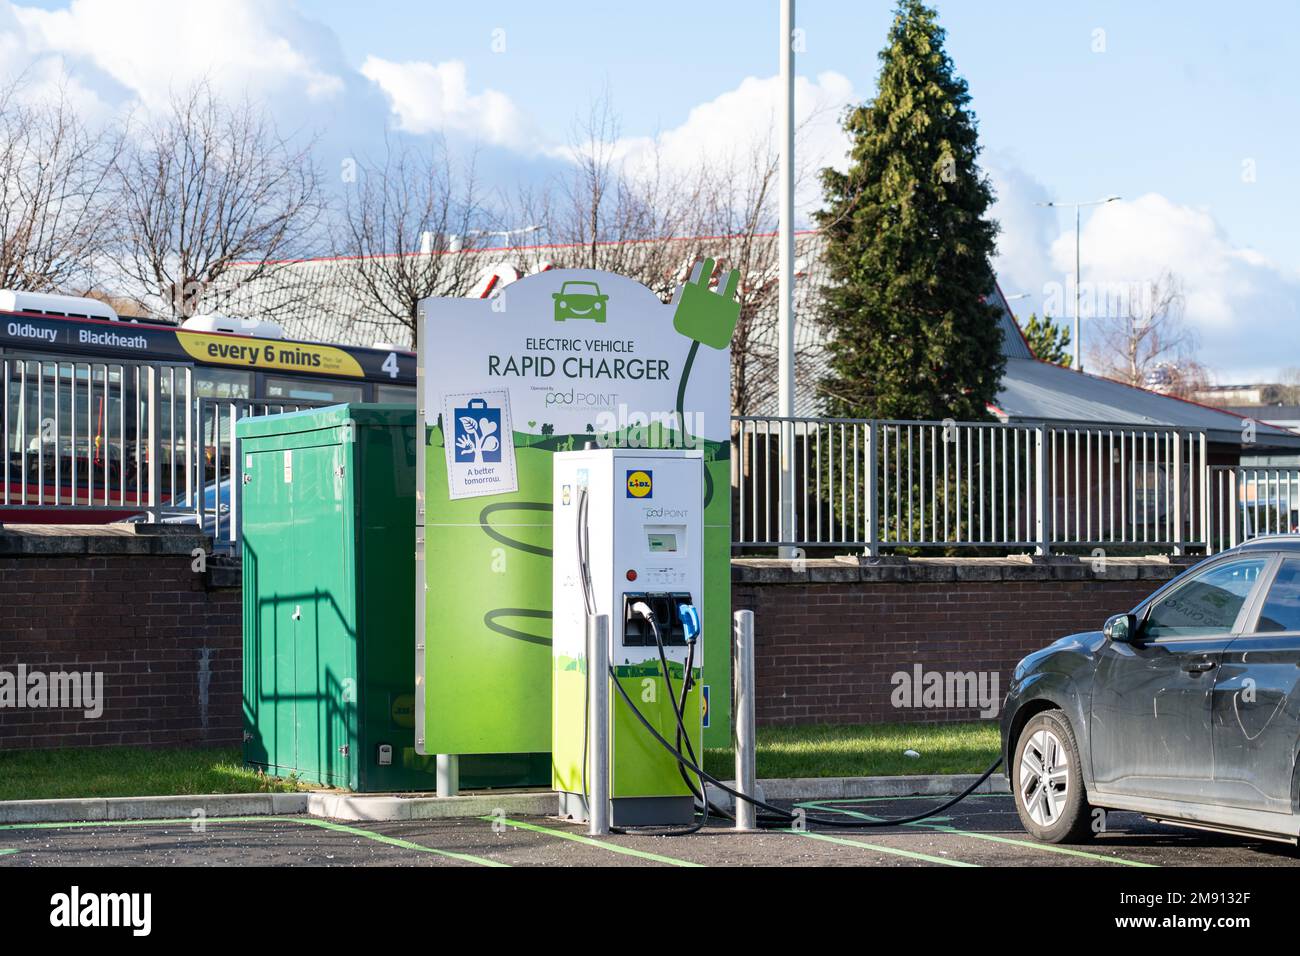 Lidl Pod Point branded Electric Vehicle charging point in the Merry Hill shopping centre in Brierley Hill, UK Stock Photo